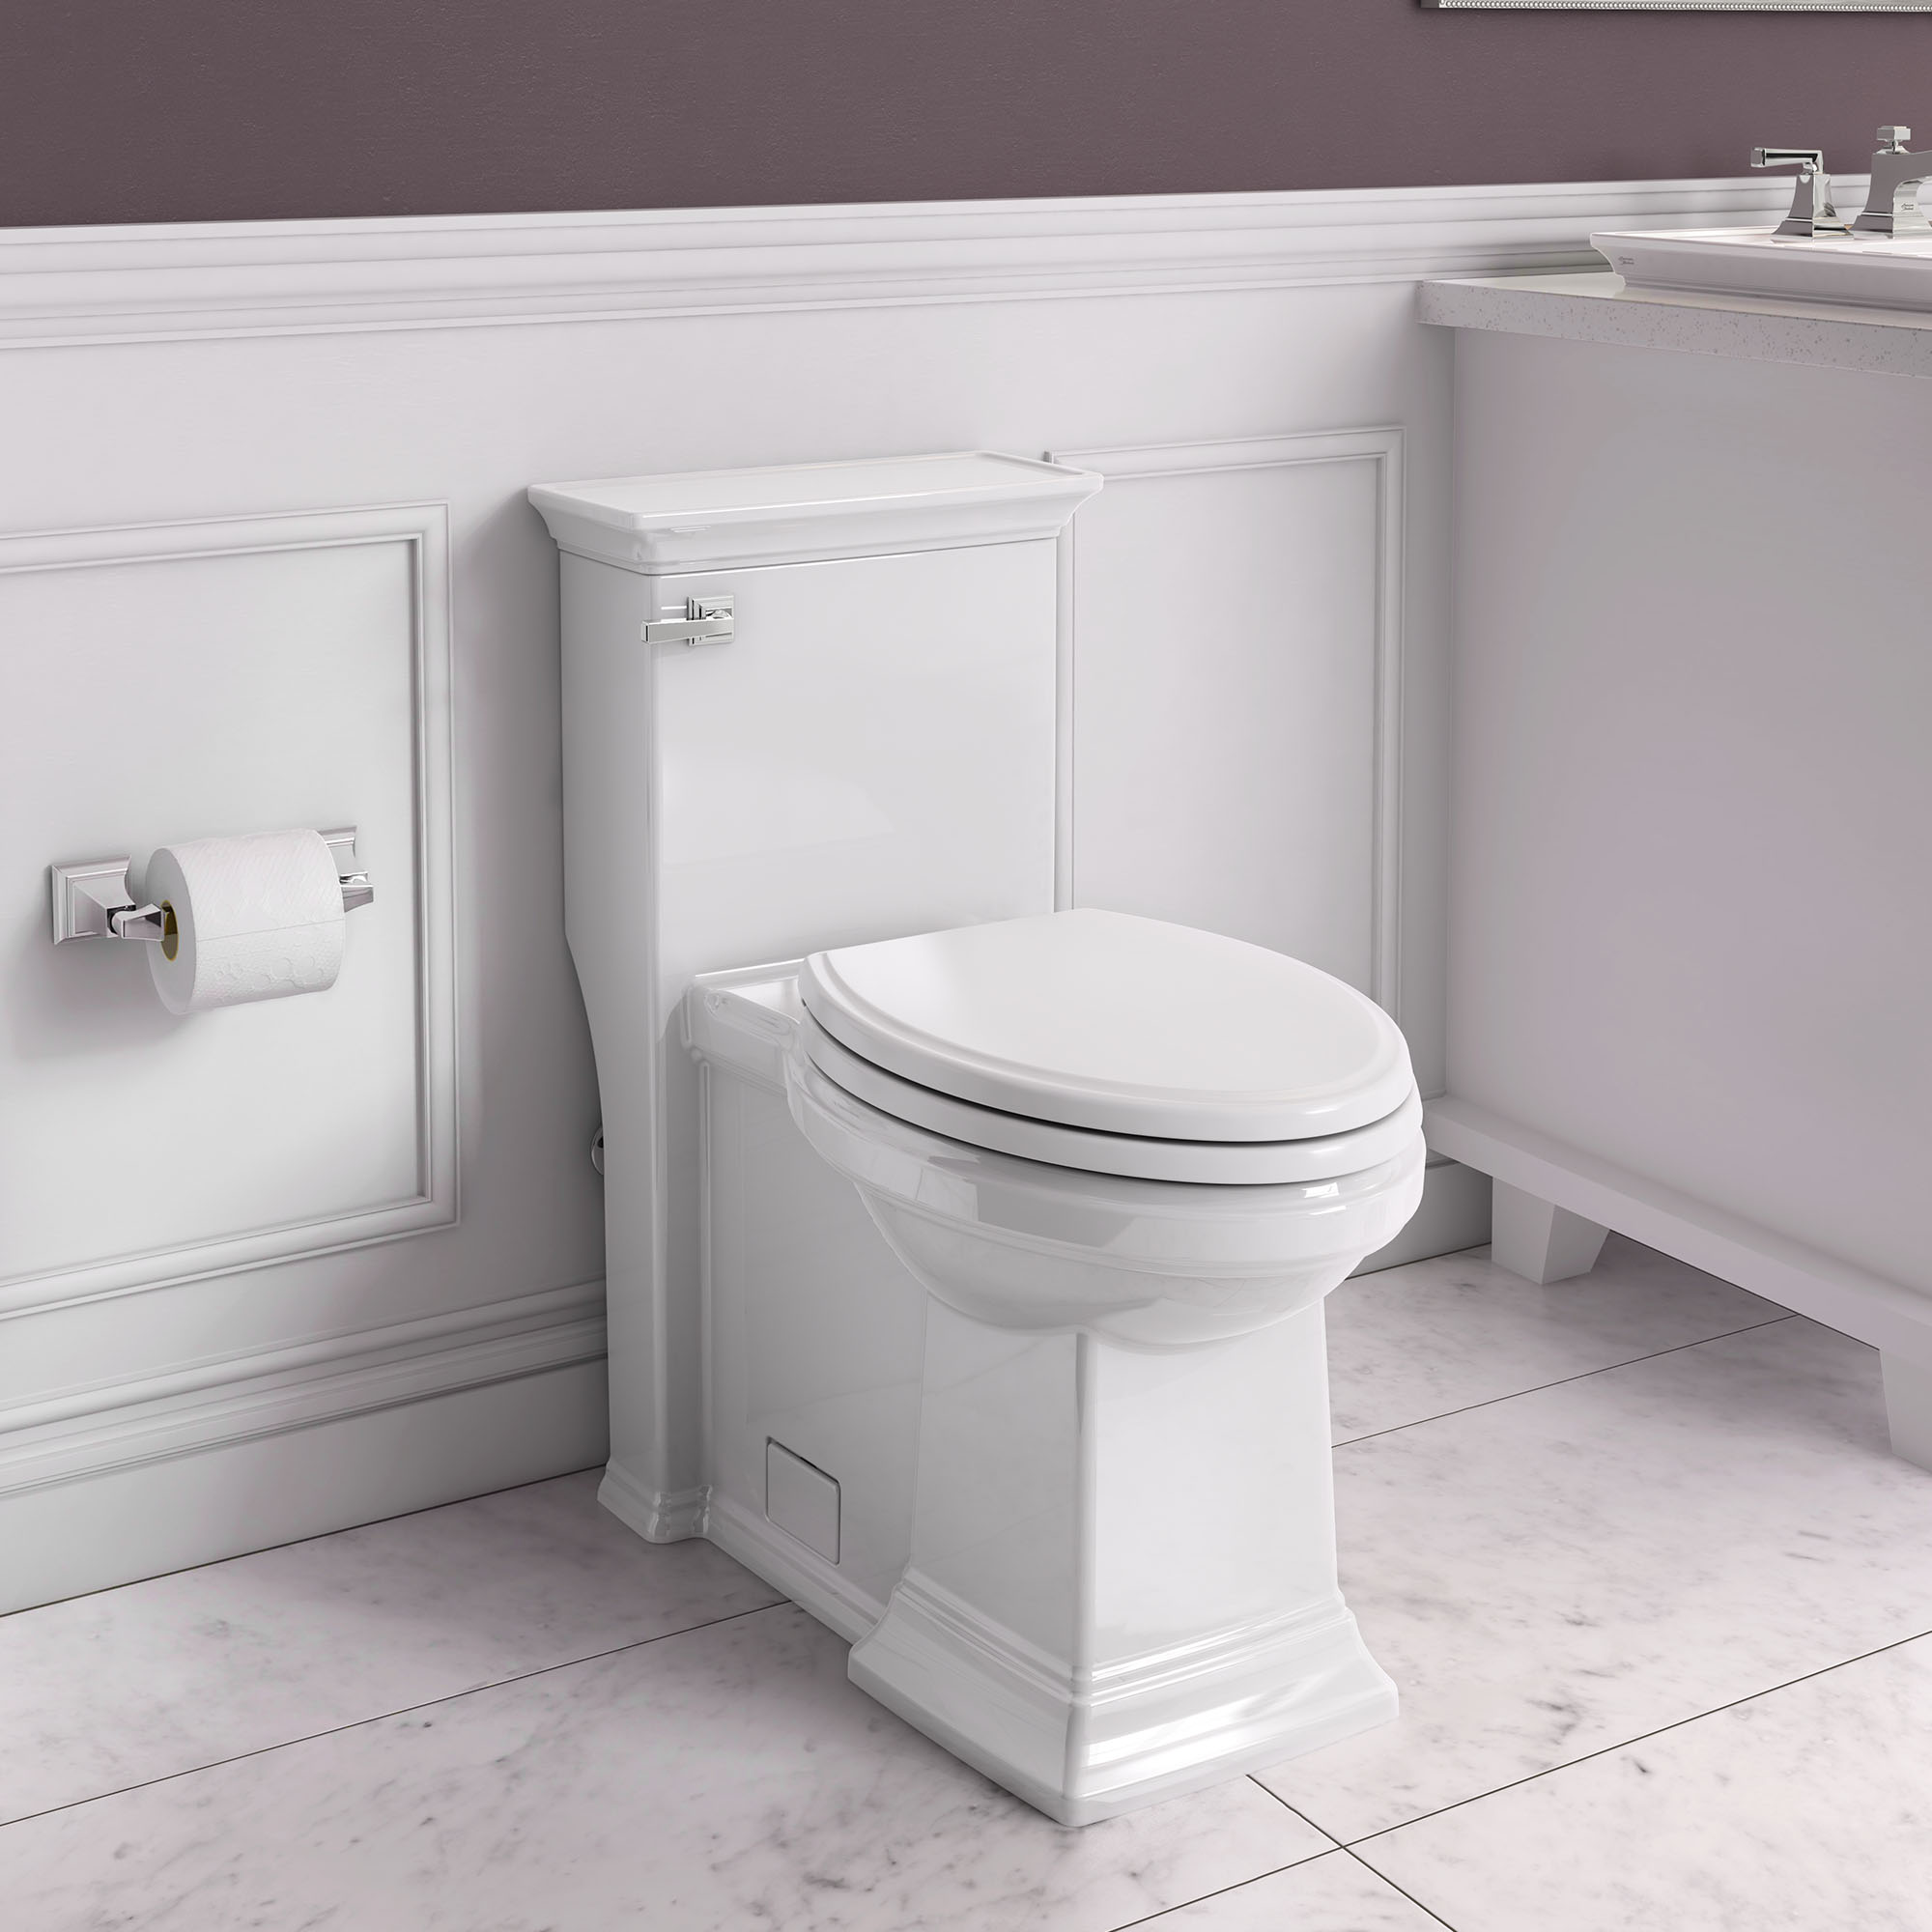 Town Square® S One-Piece 1.28 gpf/4.8 Lpf Chair Height Elongated Toilet With Seat